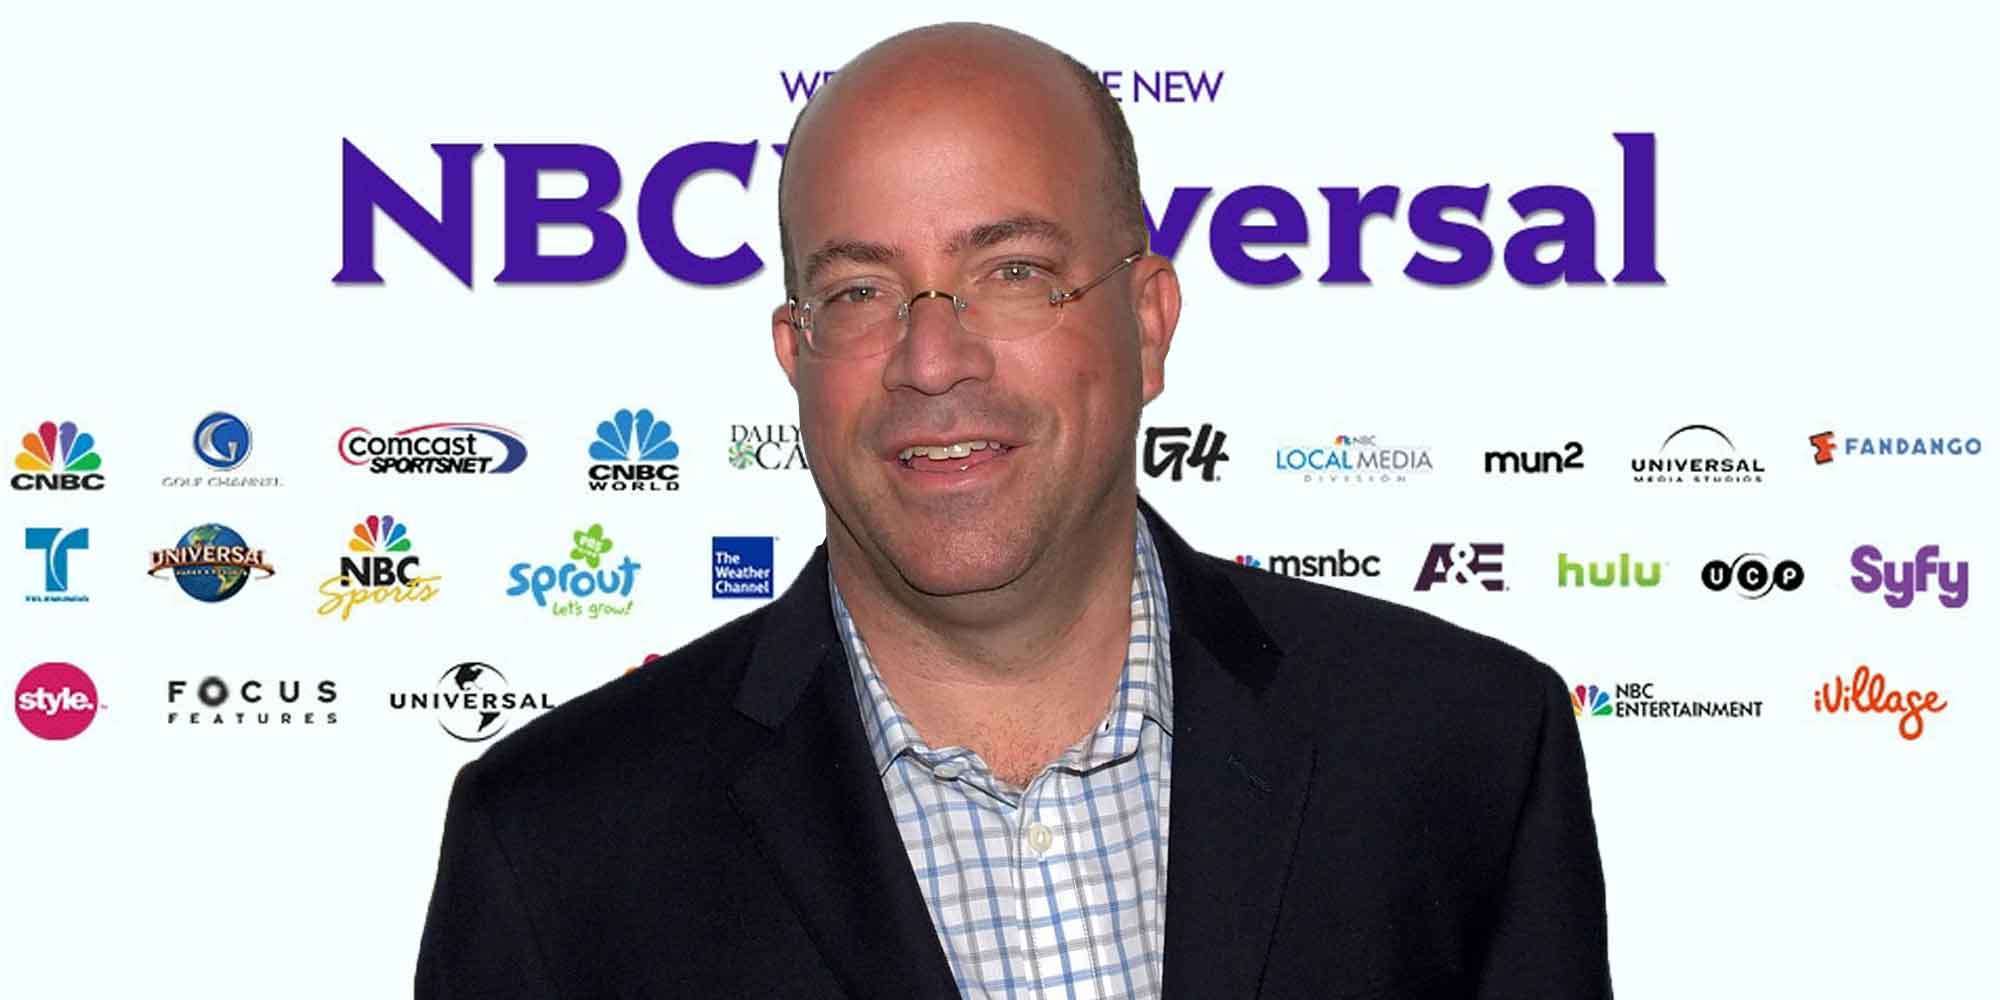 Jeff Zucker's Fall 2007 Email To NBC Universal Employees: "The Momentum Continues!"